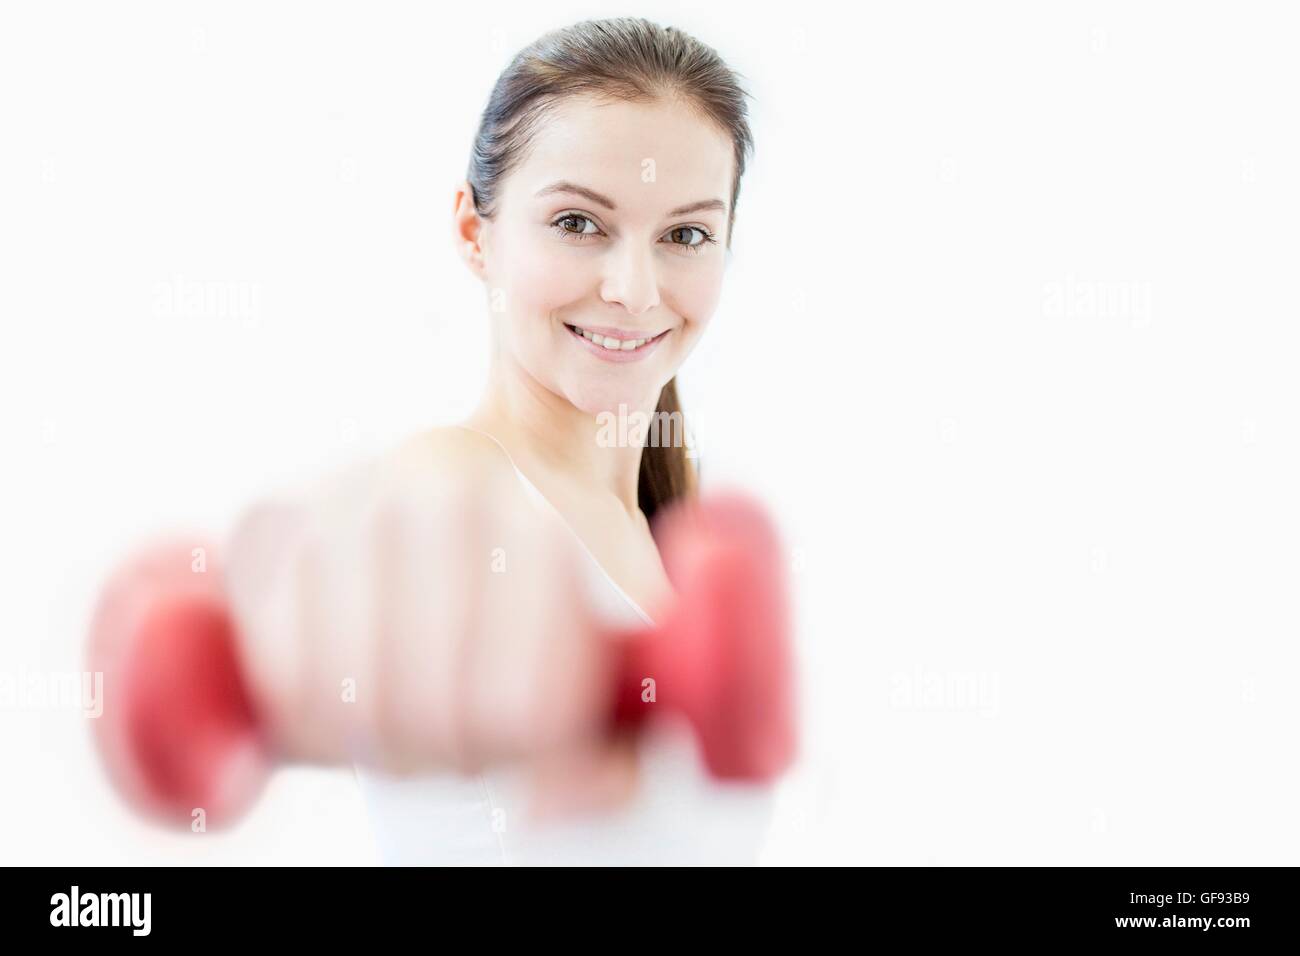 PROPERTY RELEASED. MODEL RELEASED. Smiling young woman working out with dumbbell in gym, portrait. Stock Photo